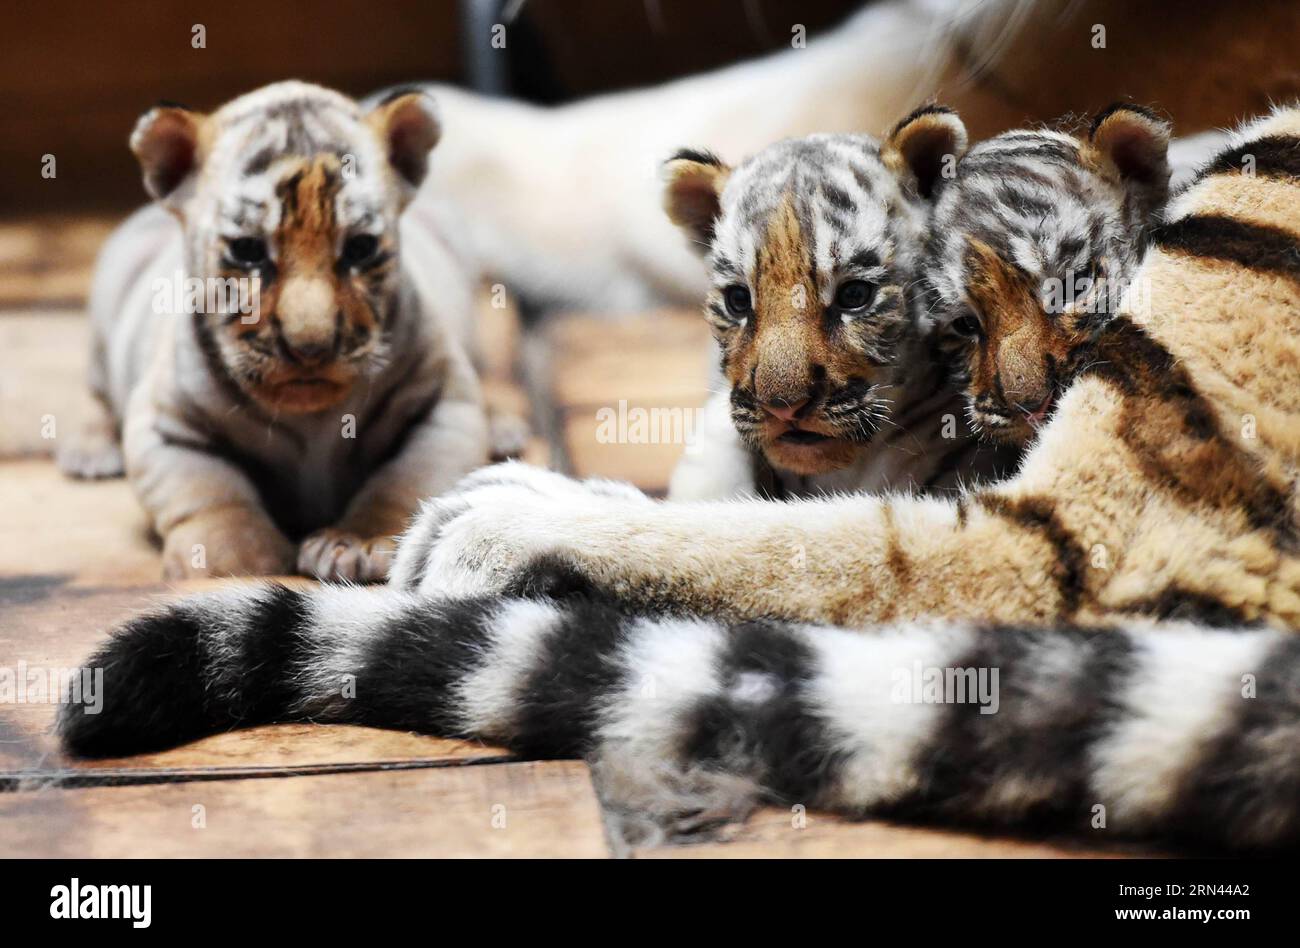 (150506) -- HARBIN, May 6, 2015 -- Siberian tiger cubs stay beside their mother at the Siberian Tiger Park in northeast China s Heilongjiang Province, May 6, 2015. A total of 20 Siberian tiger cubs, one of the world s most endangered animals, were born in 2015 at the tiger park. China established the Siberian Tiger Park in 1986 with only eight Siberian tigers. Currently, there are more than 1,000 Siberian tigers at the park, all of which have undergone DNA tests to prevent intermarriage among them. ) (wf) CHINA-HEILONGJIANG-SIBERIAN TIGER (CN) WangxJianwei PUBLICATIONxNOTxINxCHN   Harbin May 6 Stock Photo